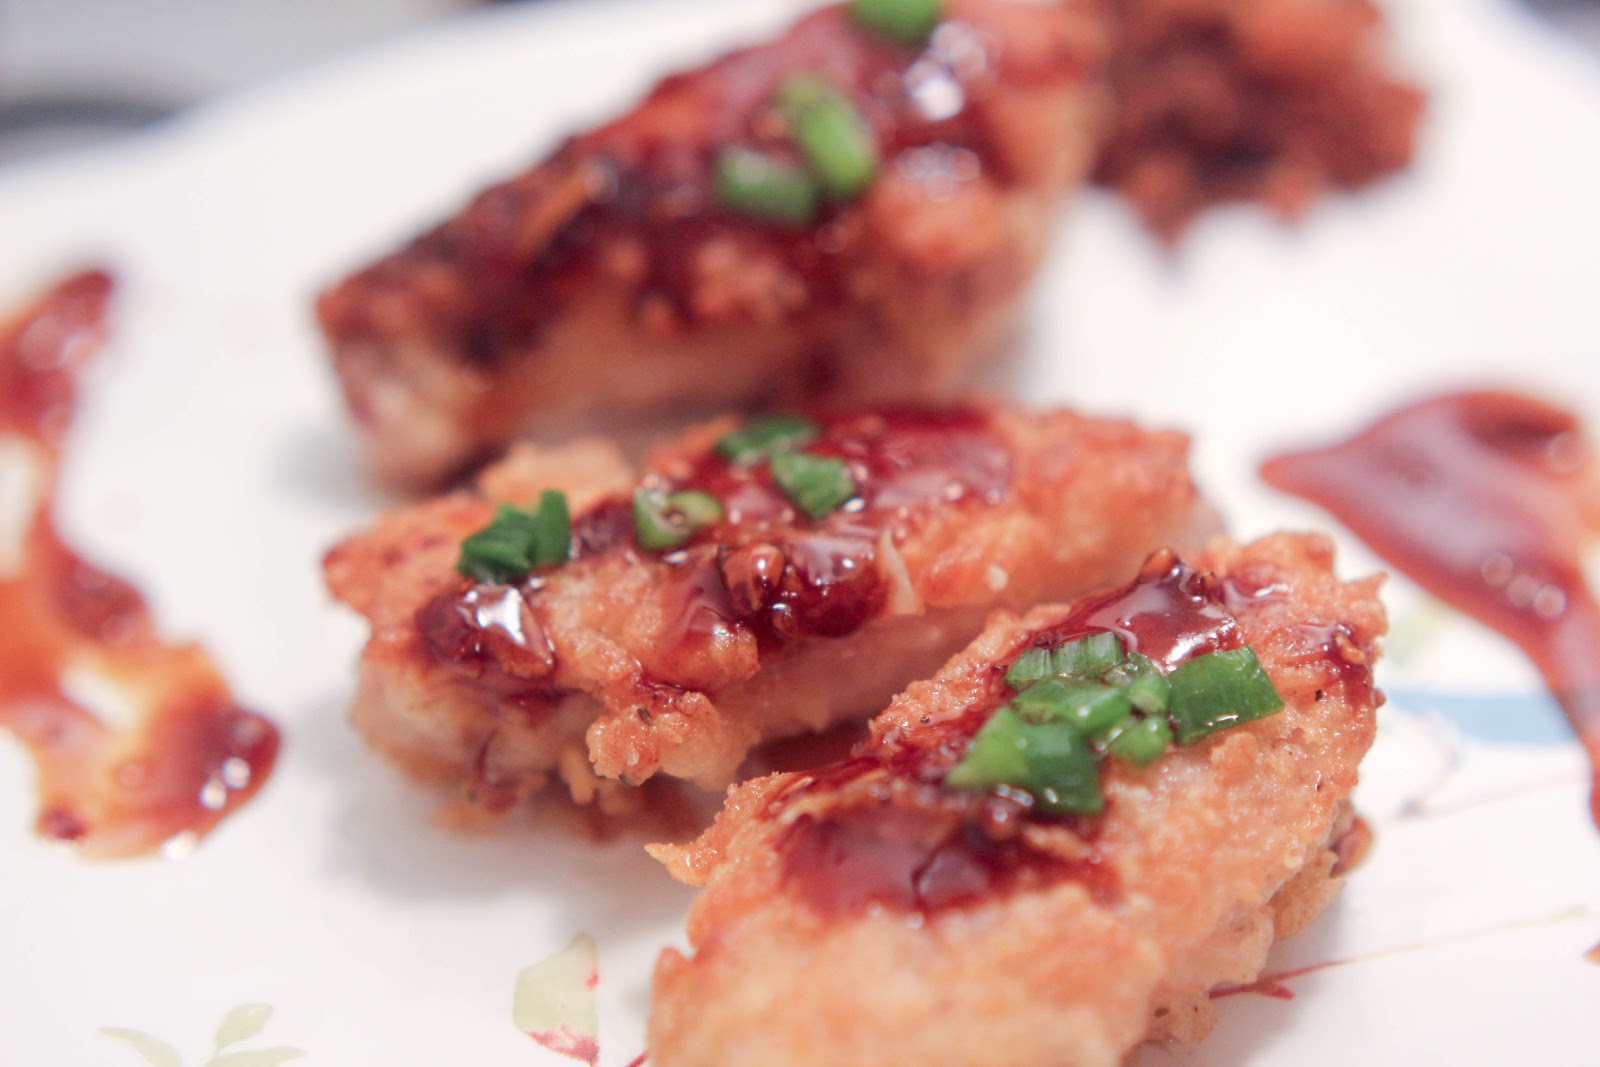 A Scientist's Love Affair with Food: Korean "Fried" Chicken with Sweet and Spicy Chili Sauce